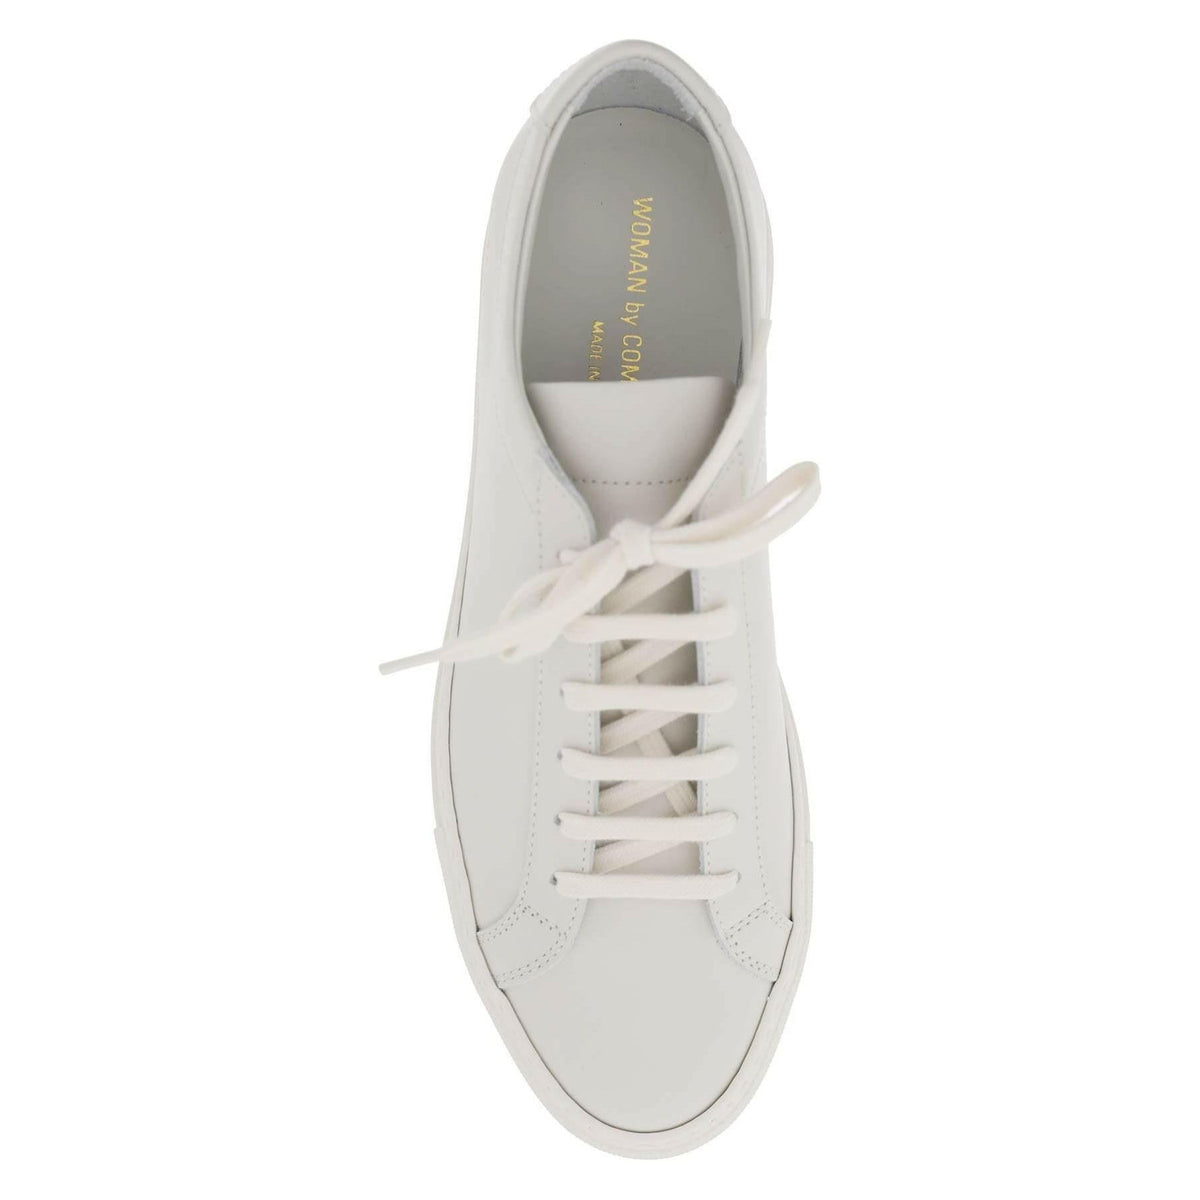 COMMON PROJECTS - Warm White Original Achilles Low-Top Leather Sneakers - JOHN JULIA